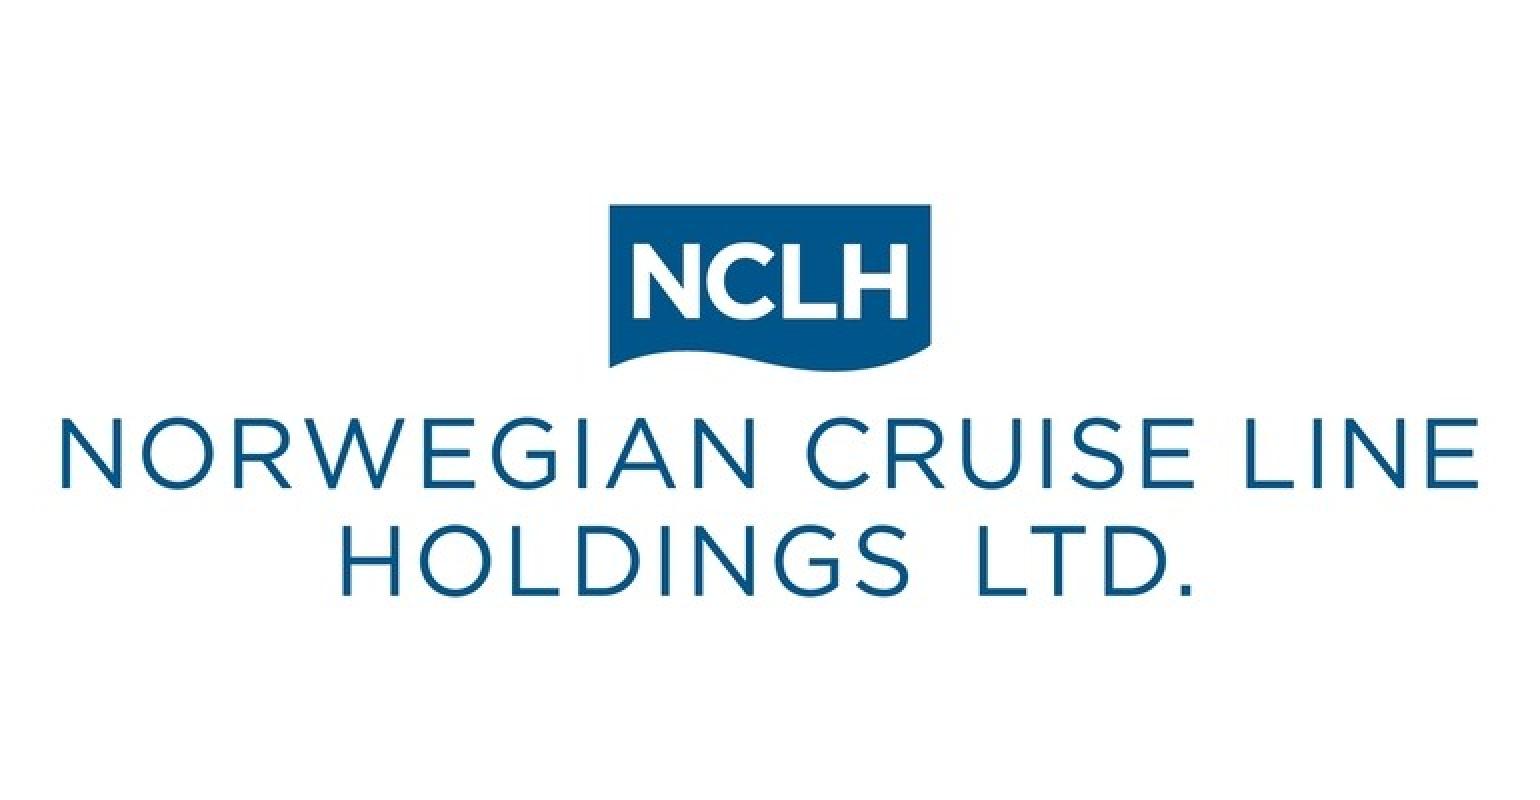 NCLH secures extra 675 million liquidity amid COVID19 uncertainty